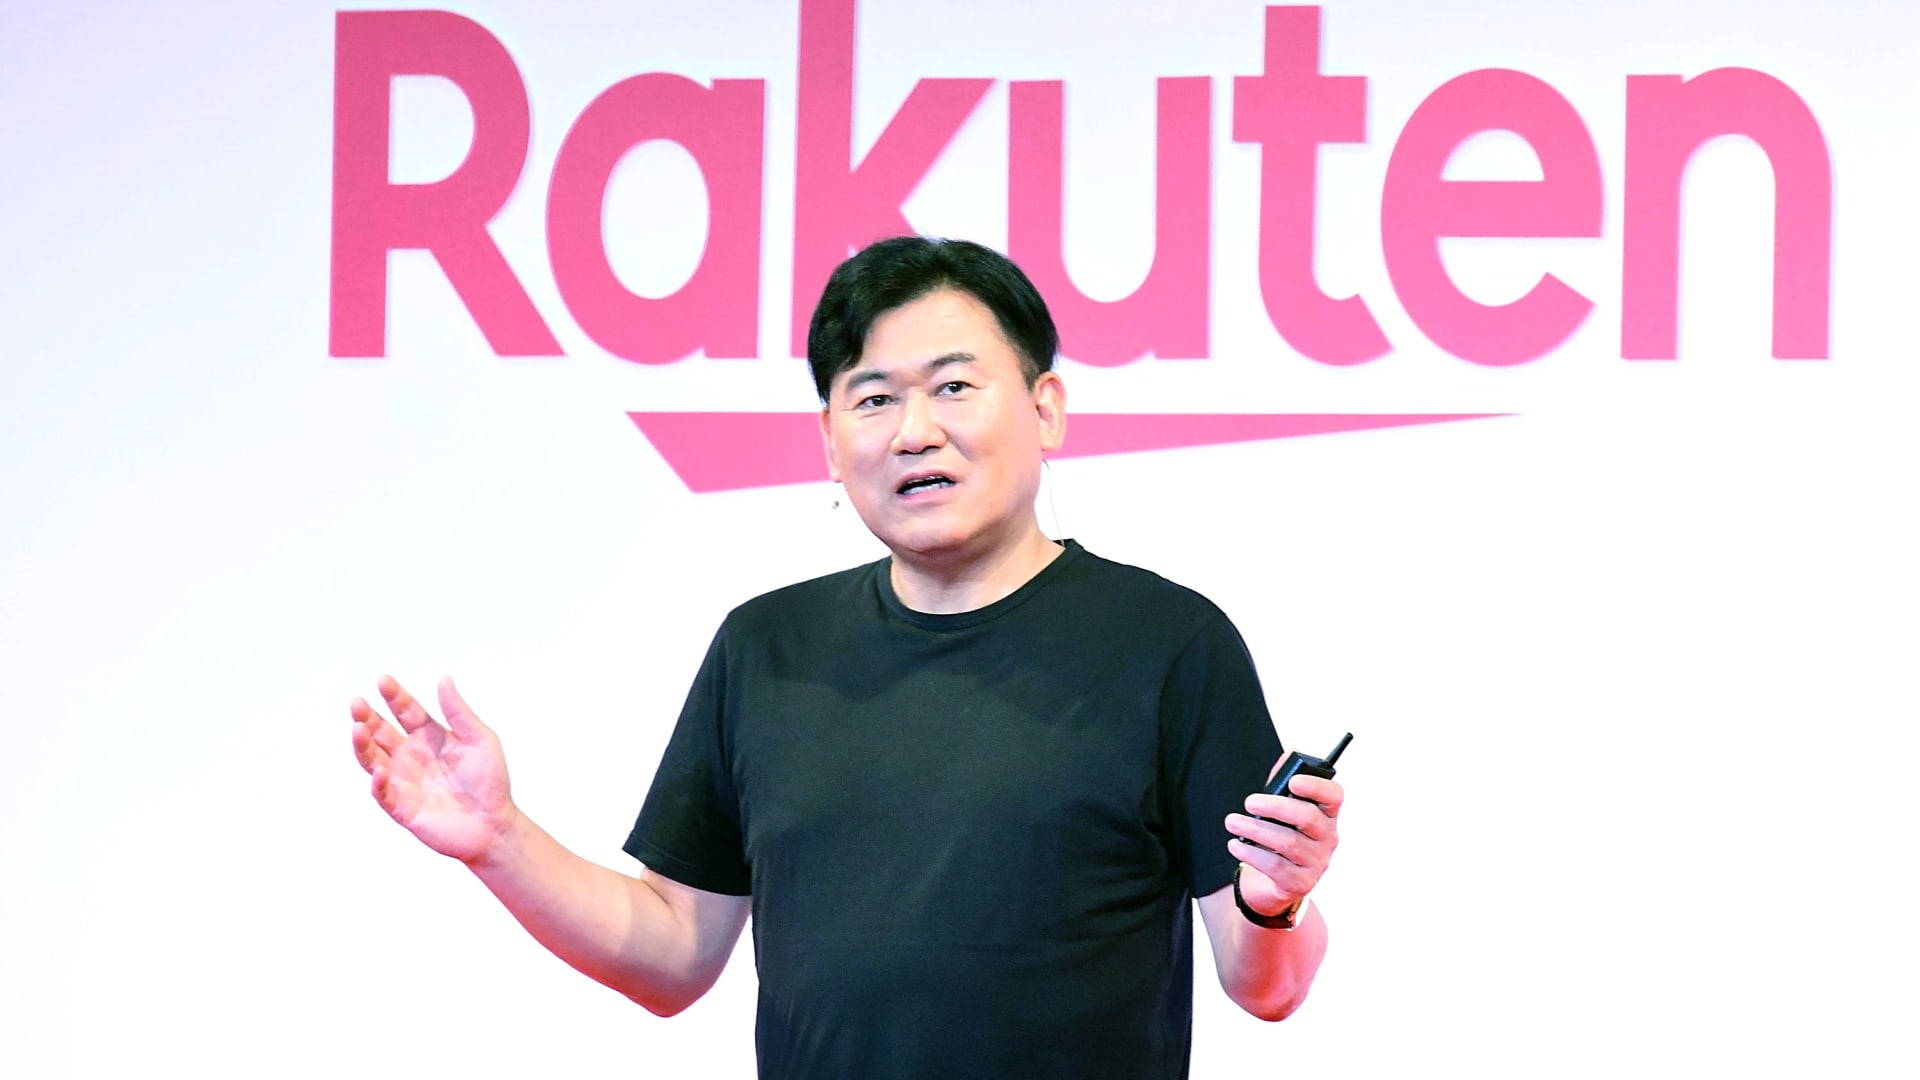 Rakuten makes first mobile foray into Europe as debt overhangs firm